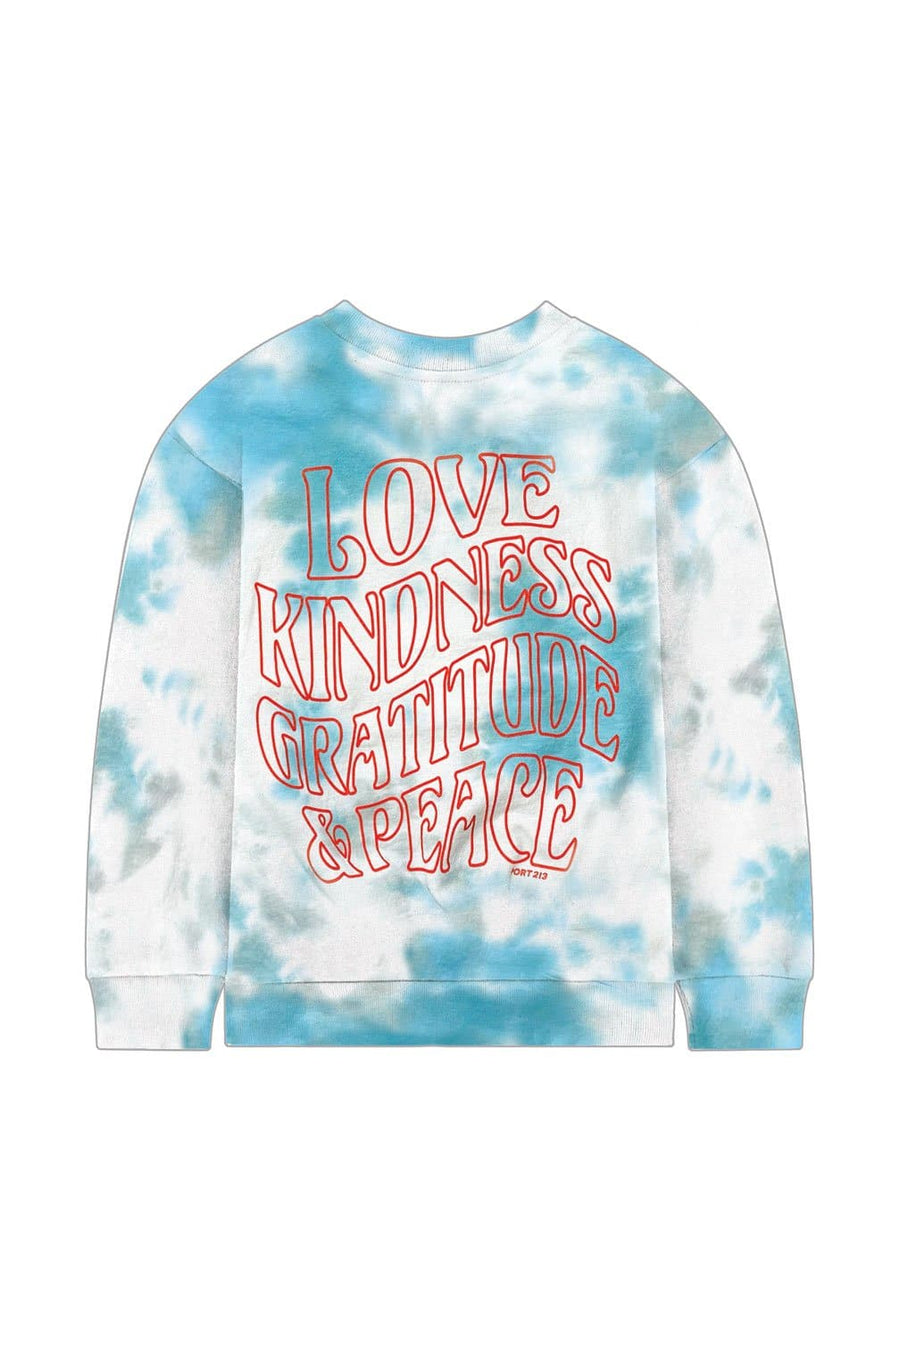 LOVE and KINDNESS People Sweatshirt - Teal and Grey